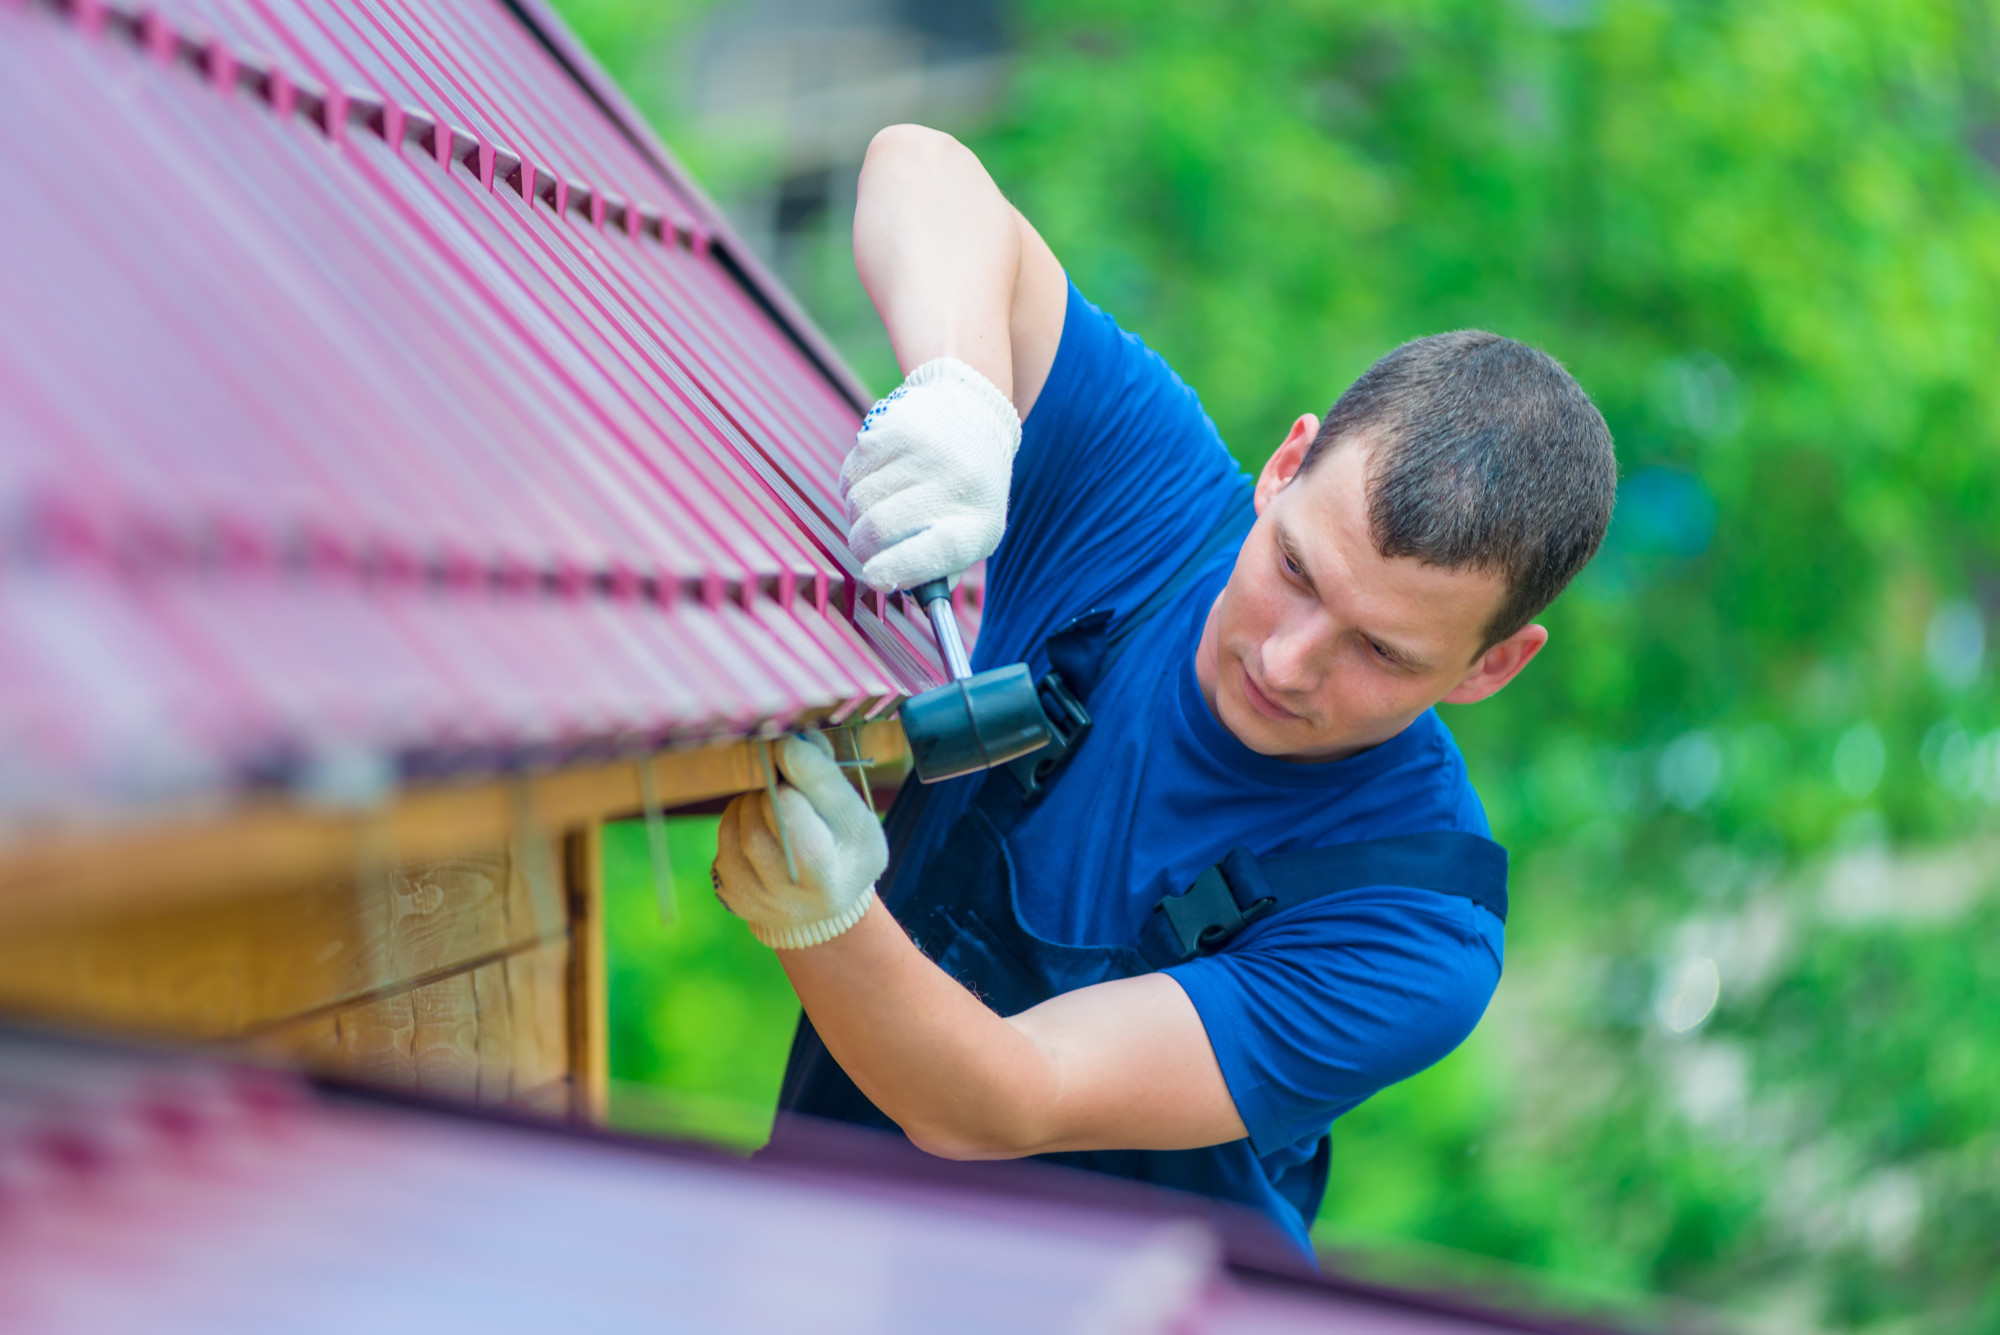 Roof Inspections - All You Need to Know